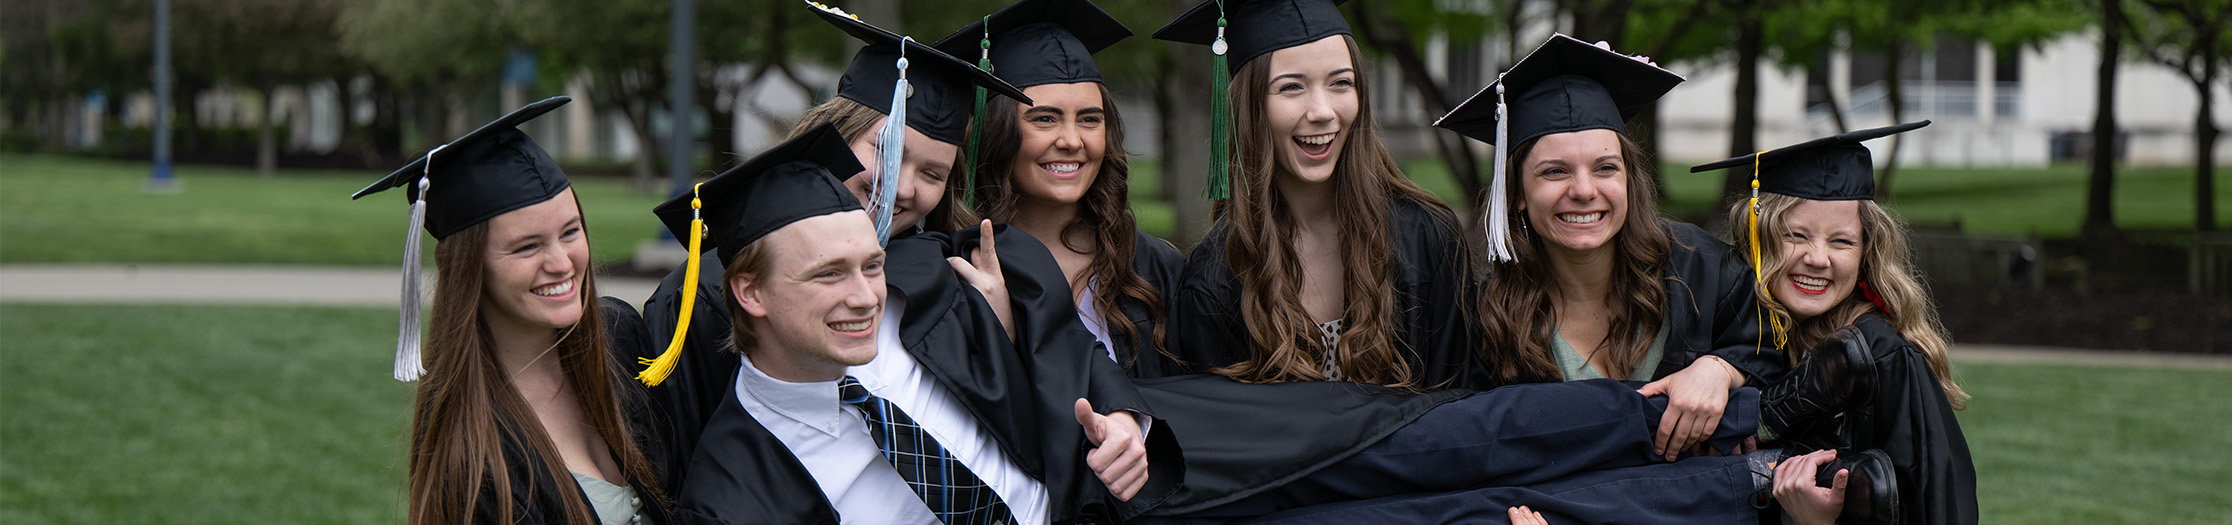 6 female students in graduation wear holding up one male in graduation wear